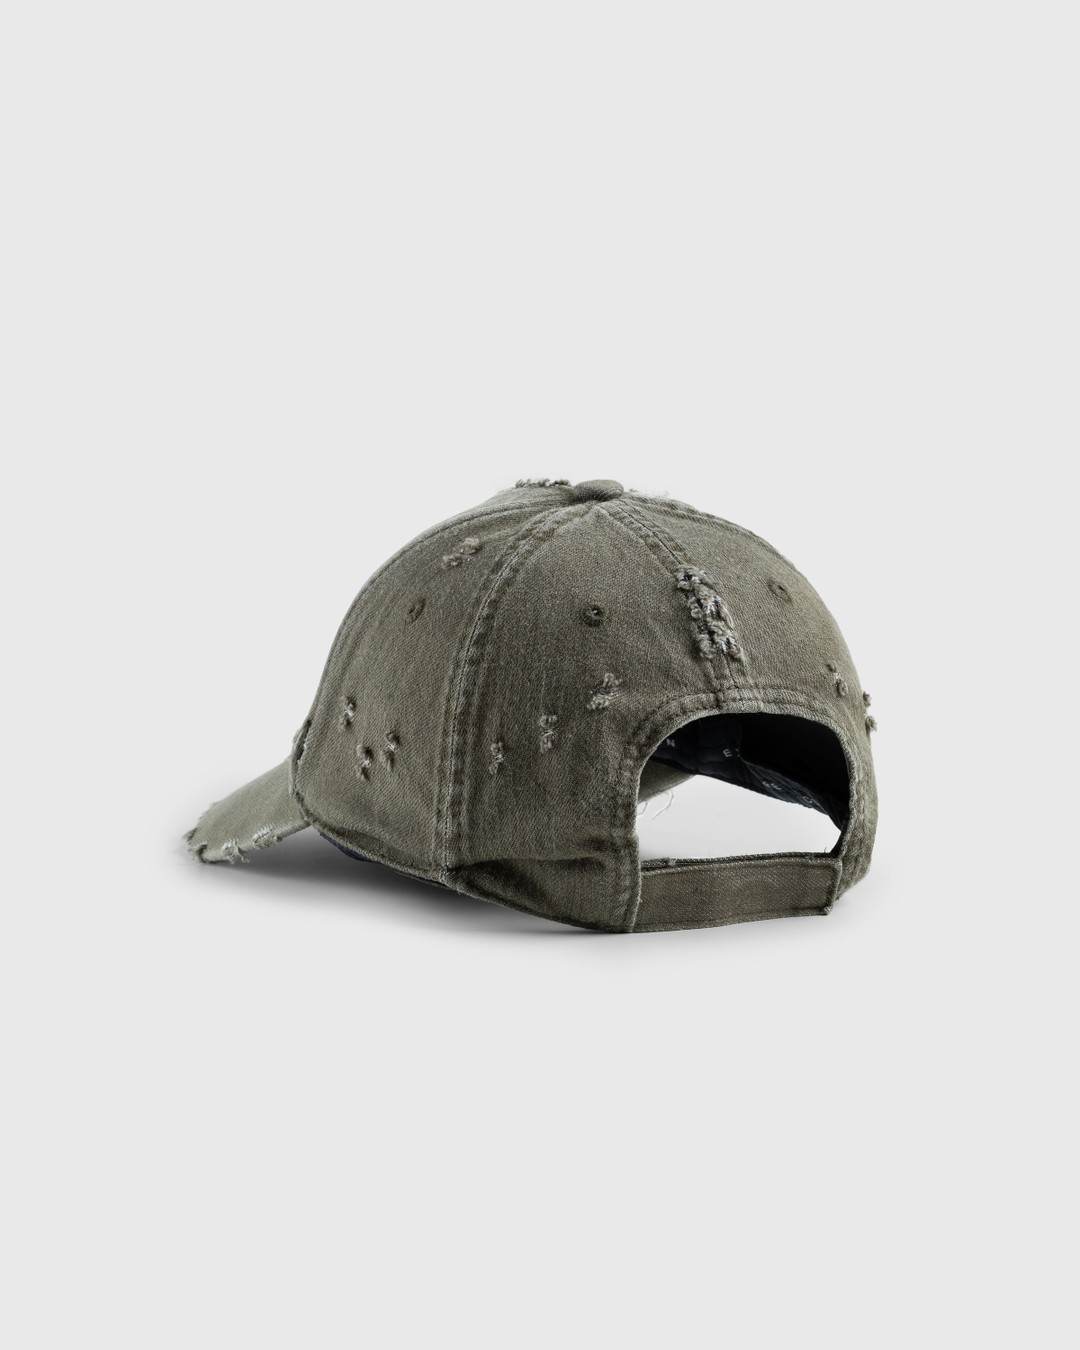 Martine Rose – Rolled Cap Green - One Size